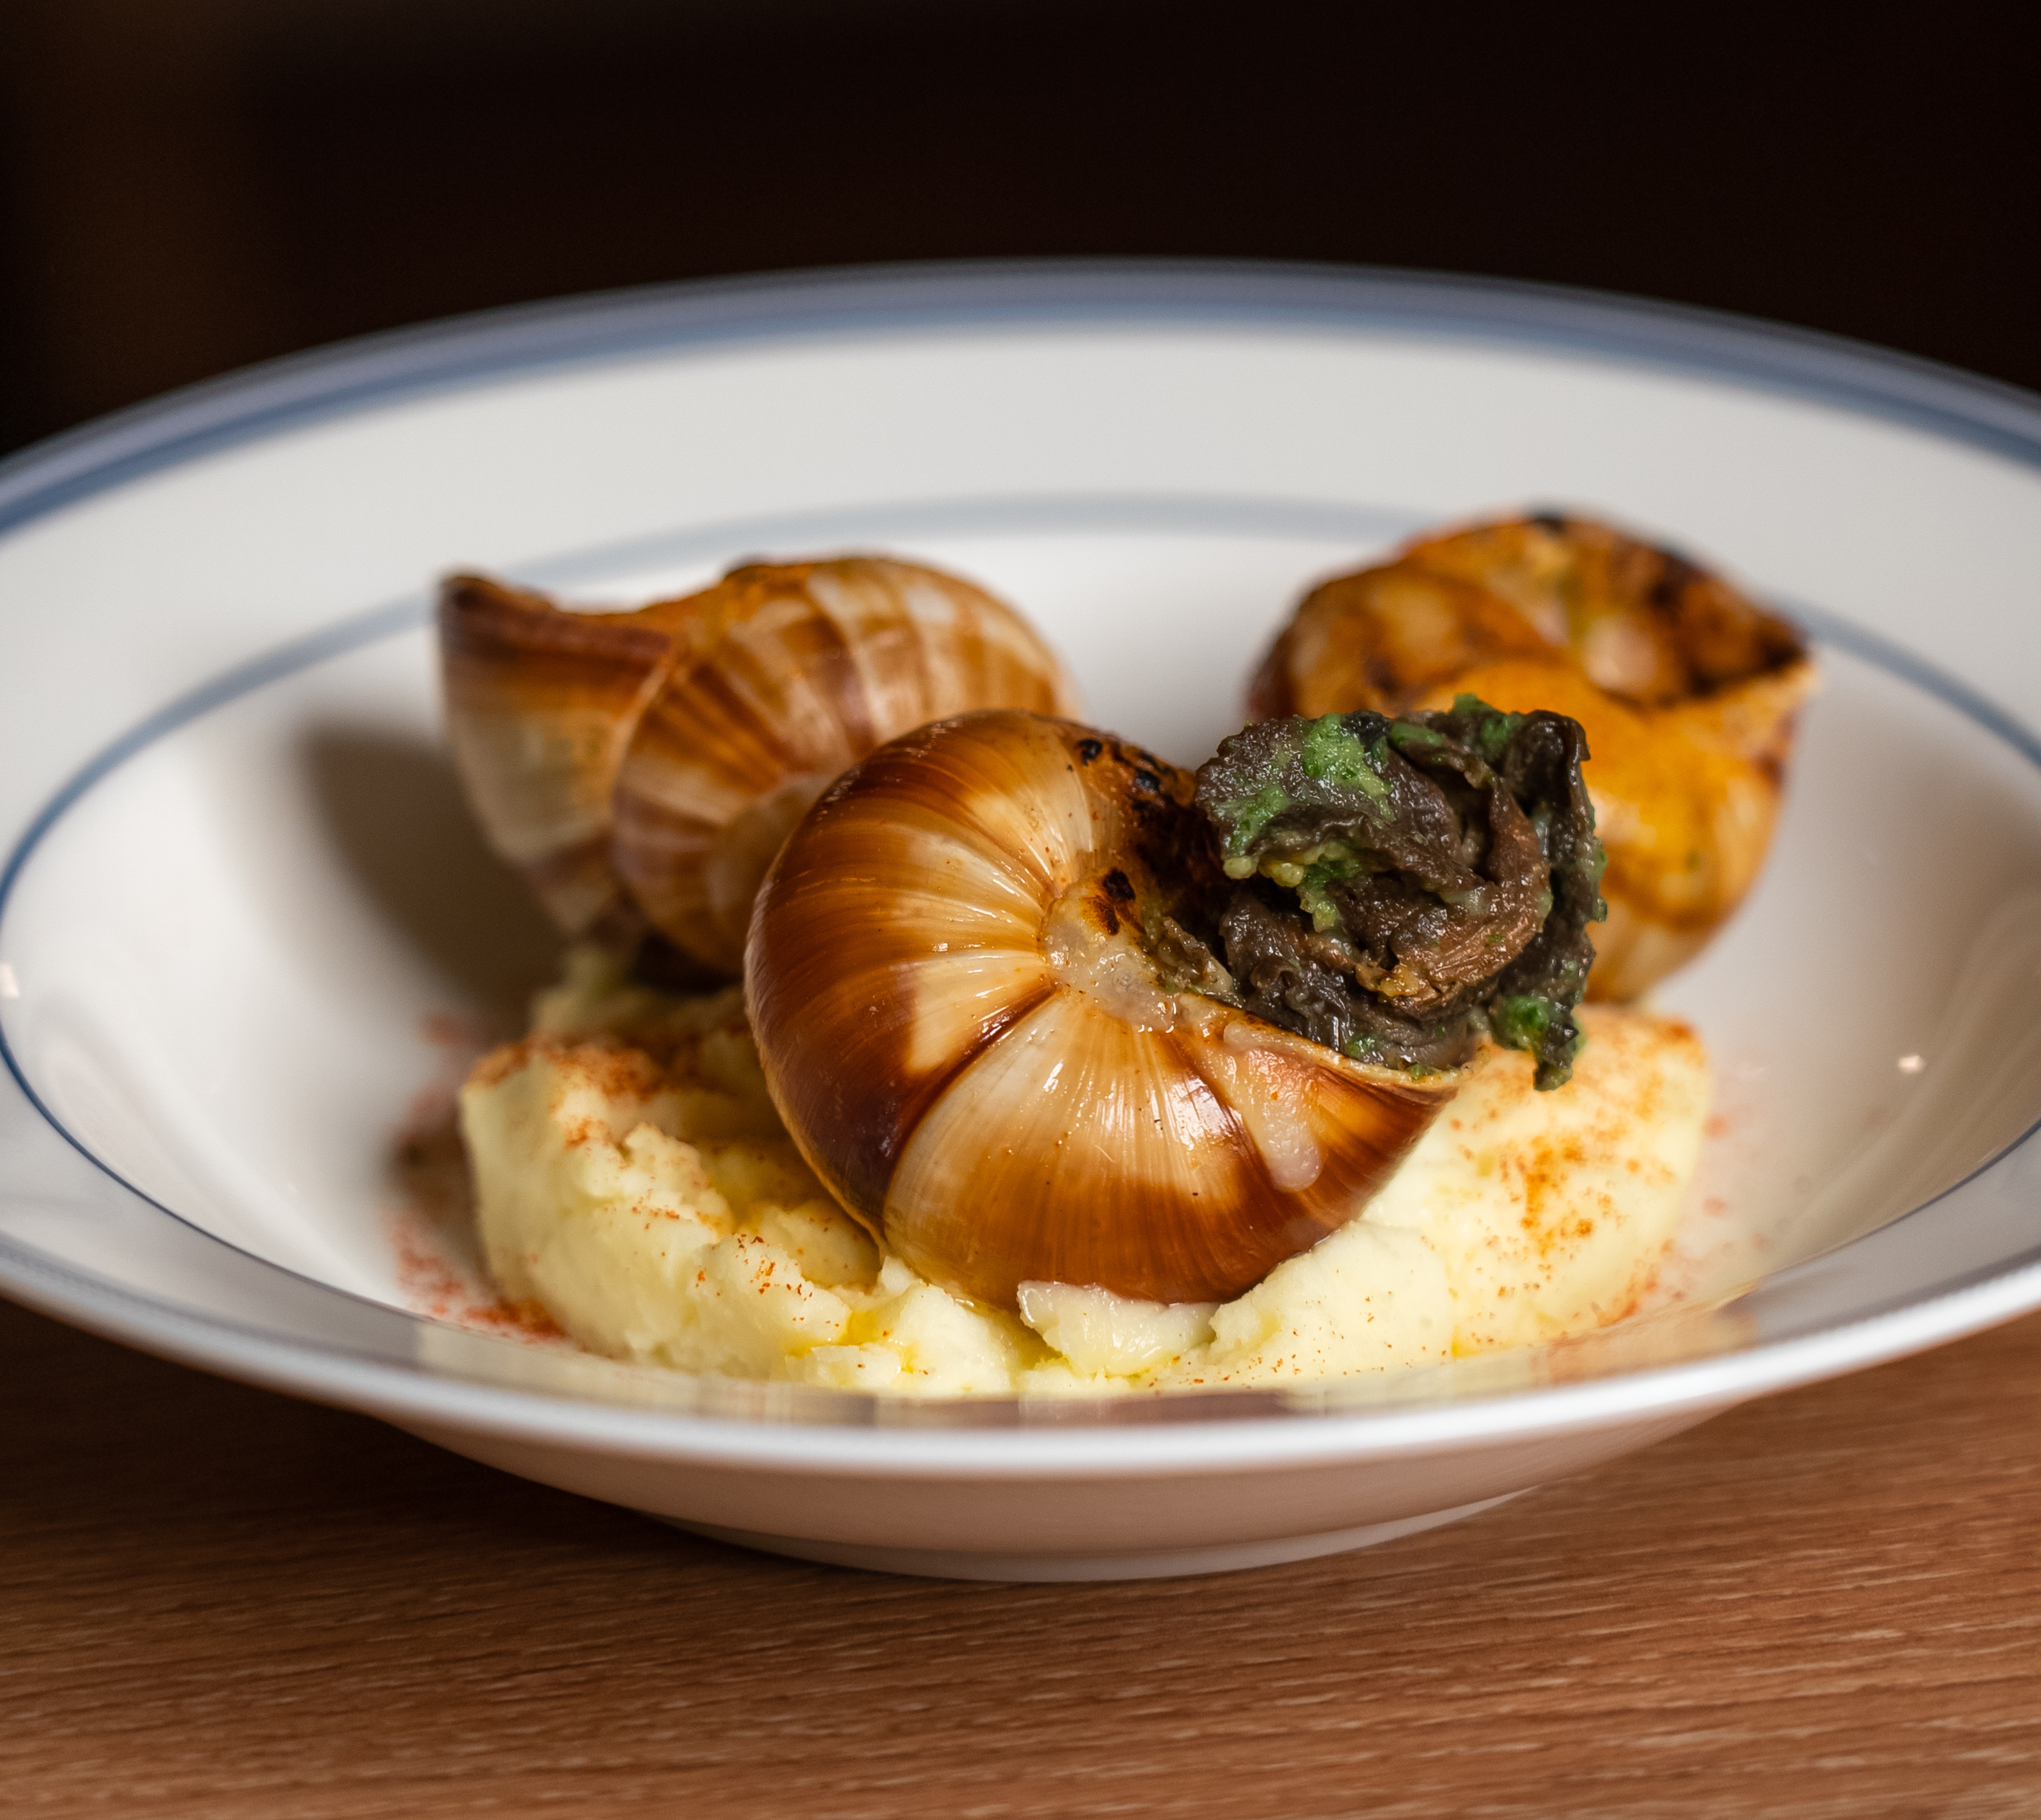 CR apm_Bistro Le Parisien_Baked Escargot with Garlic Butter Sauce and Mashed Potatoes 香蒜牛油焗田螺配薯蓉.jpg